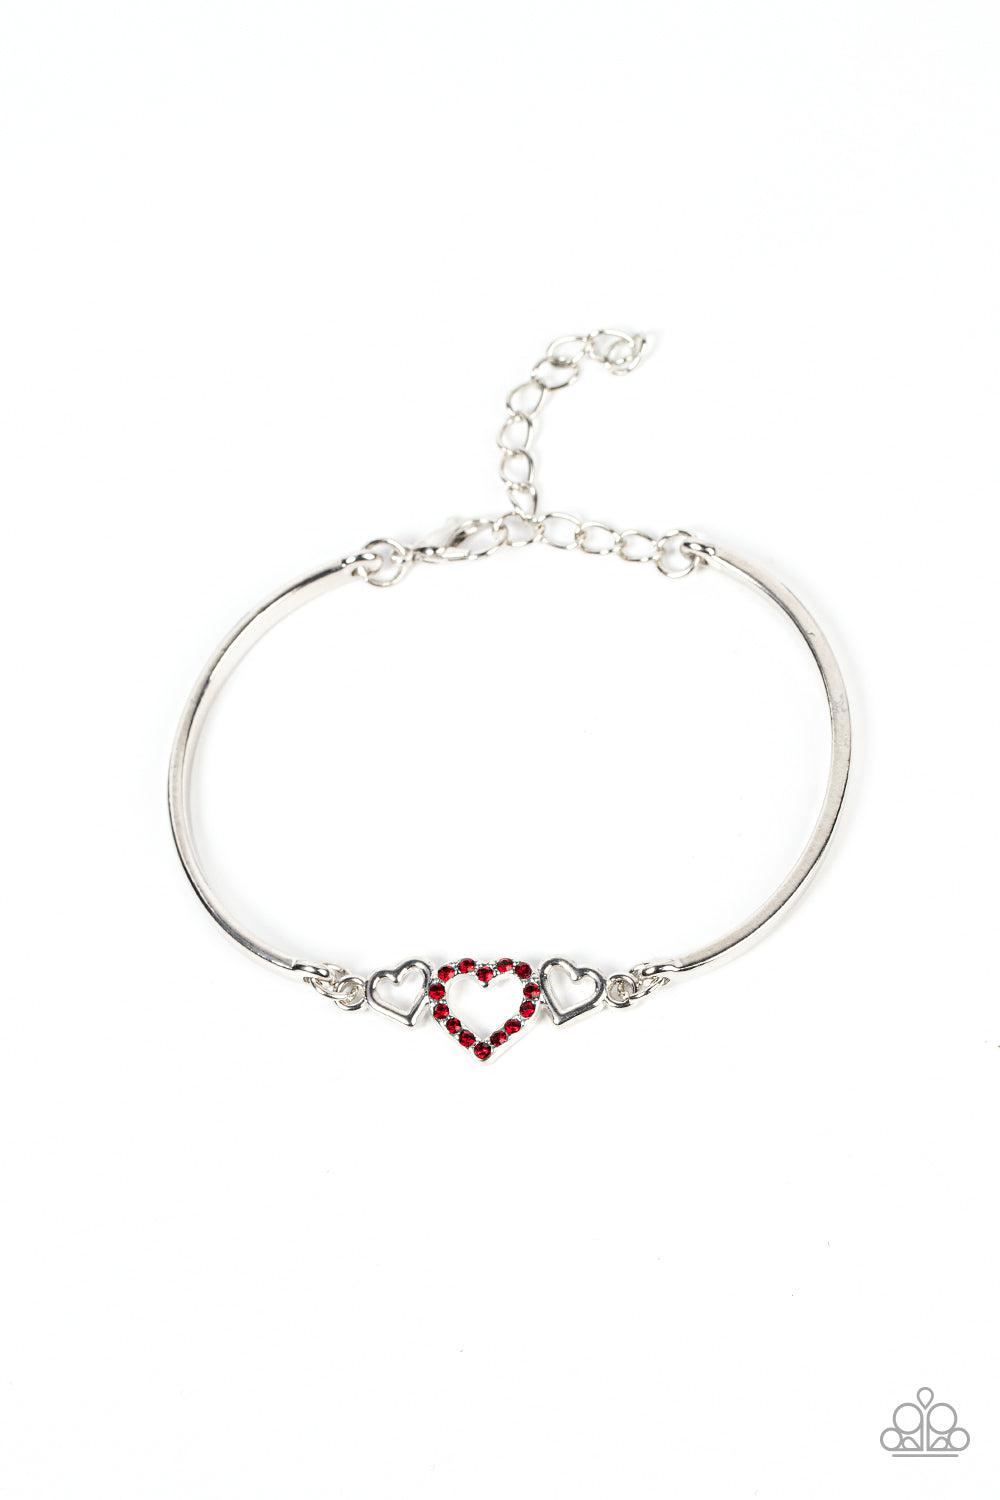 Cupids Confessions Red Rhinestone Heart Bracelet - Paparazzi Accessories- lightbox - CarasShop.com - $5 Jewelry by Cara Jewels